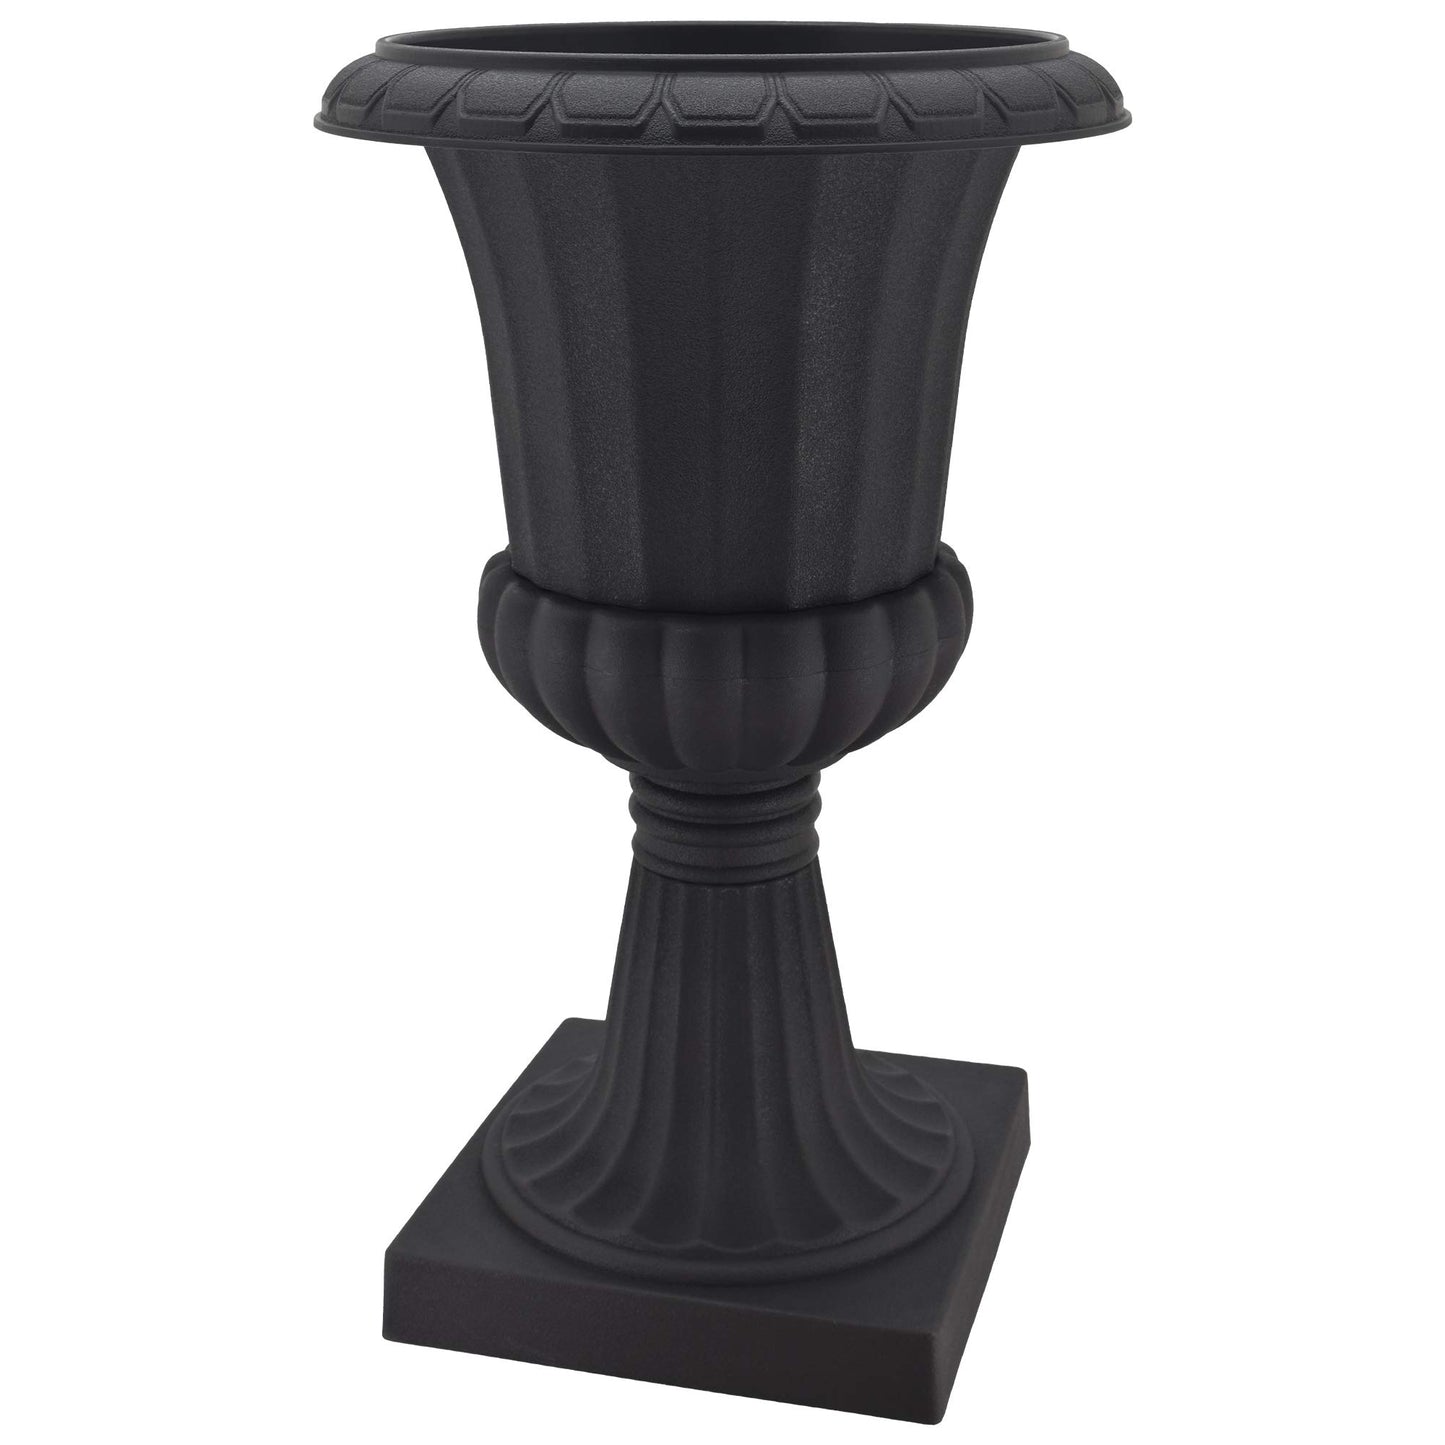 Arcadia Garden Products PL50BK-2 Deluxe Plastic Urn(Pack of 2), Black